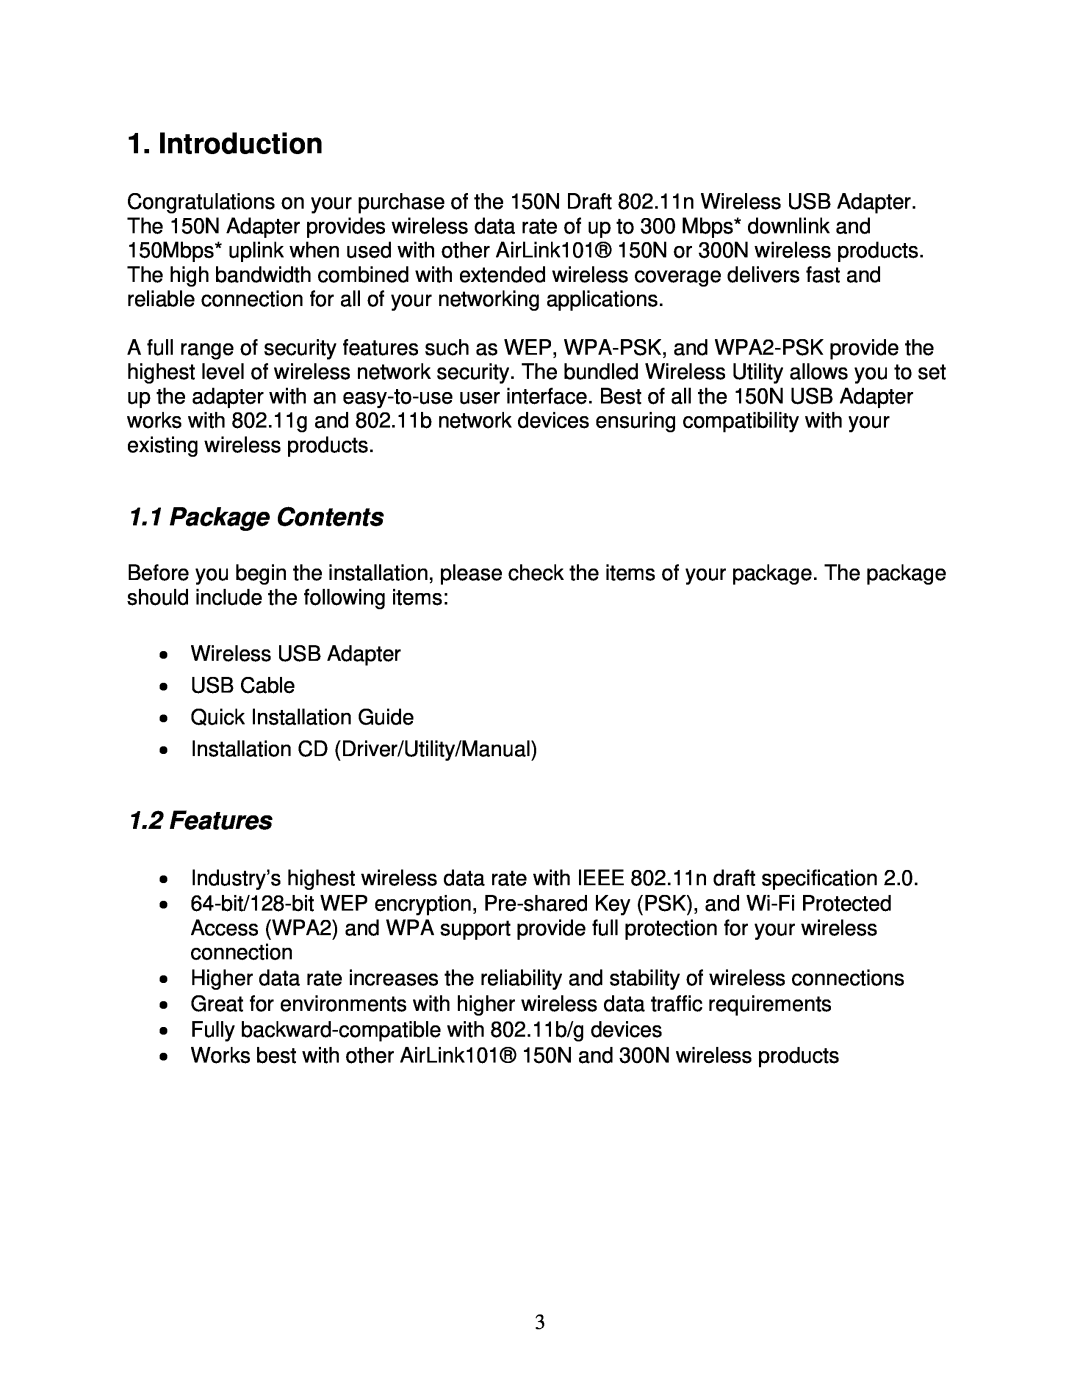 Airlink101 AWLL6070 user manual Introduction, Package Contents, Features 